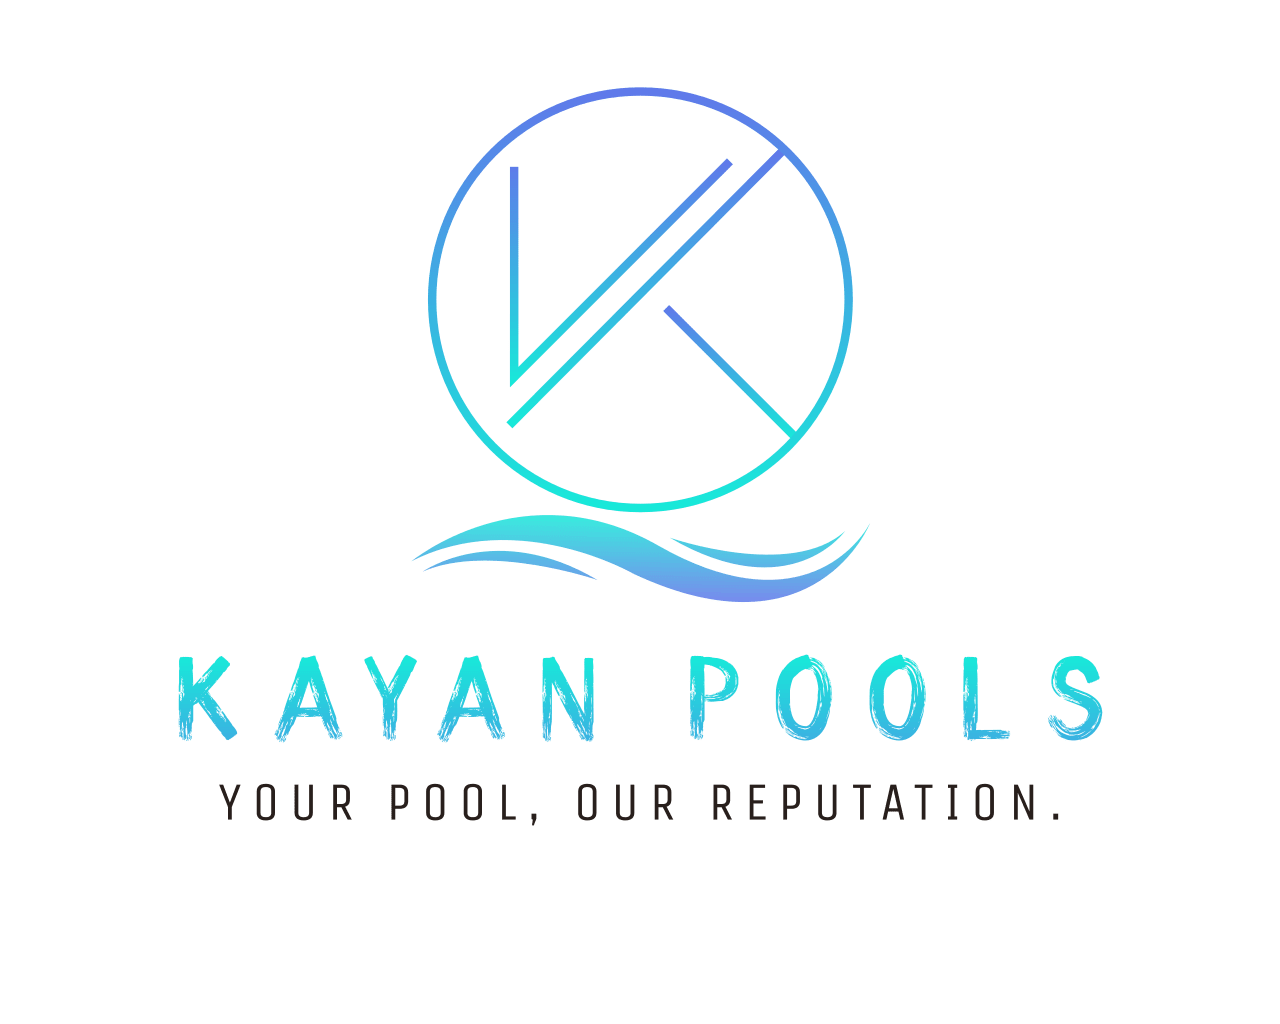 Kayan Pools - Your pool, Our reputation.